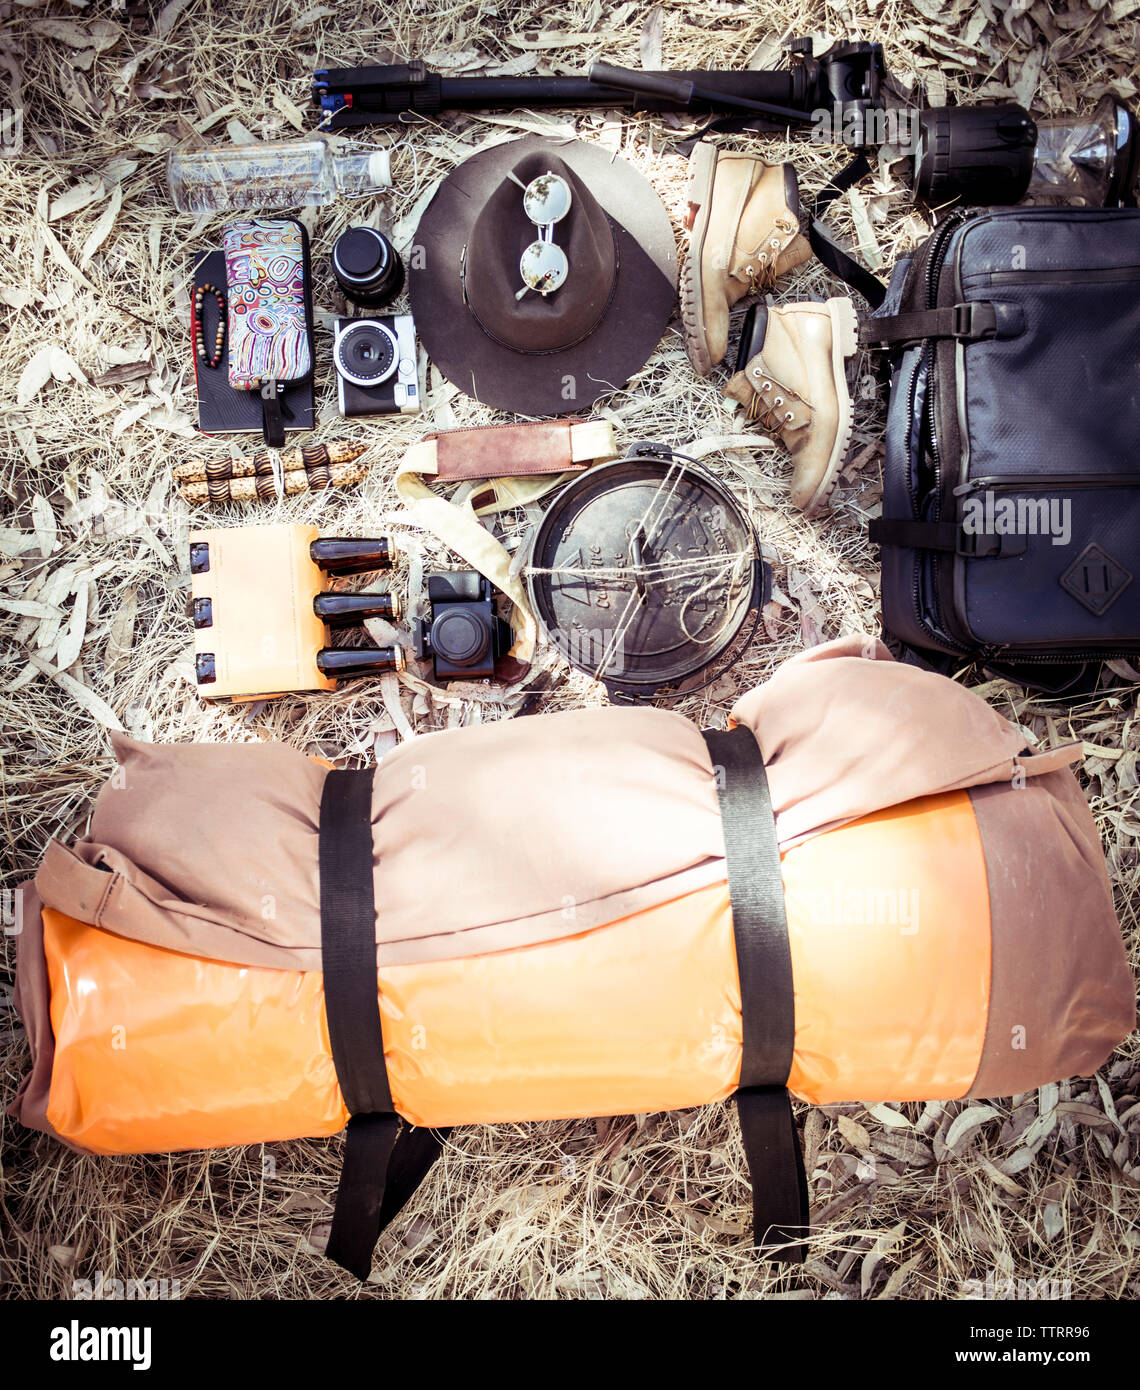 https://c8.alamy.com/comp/TTRR96/high-angle-view-of-camping-equipment-with-personal-accessories-on-field-TTRR96.jpg